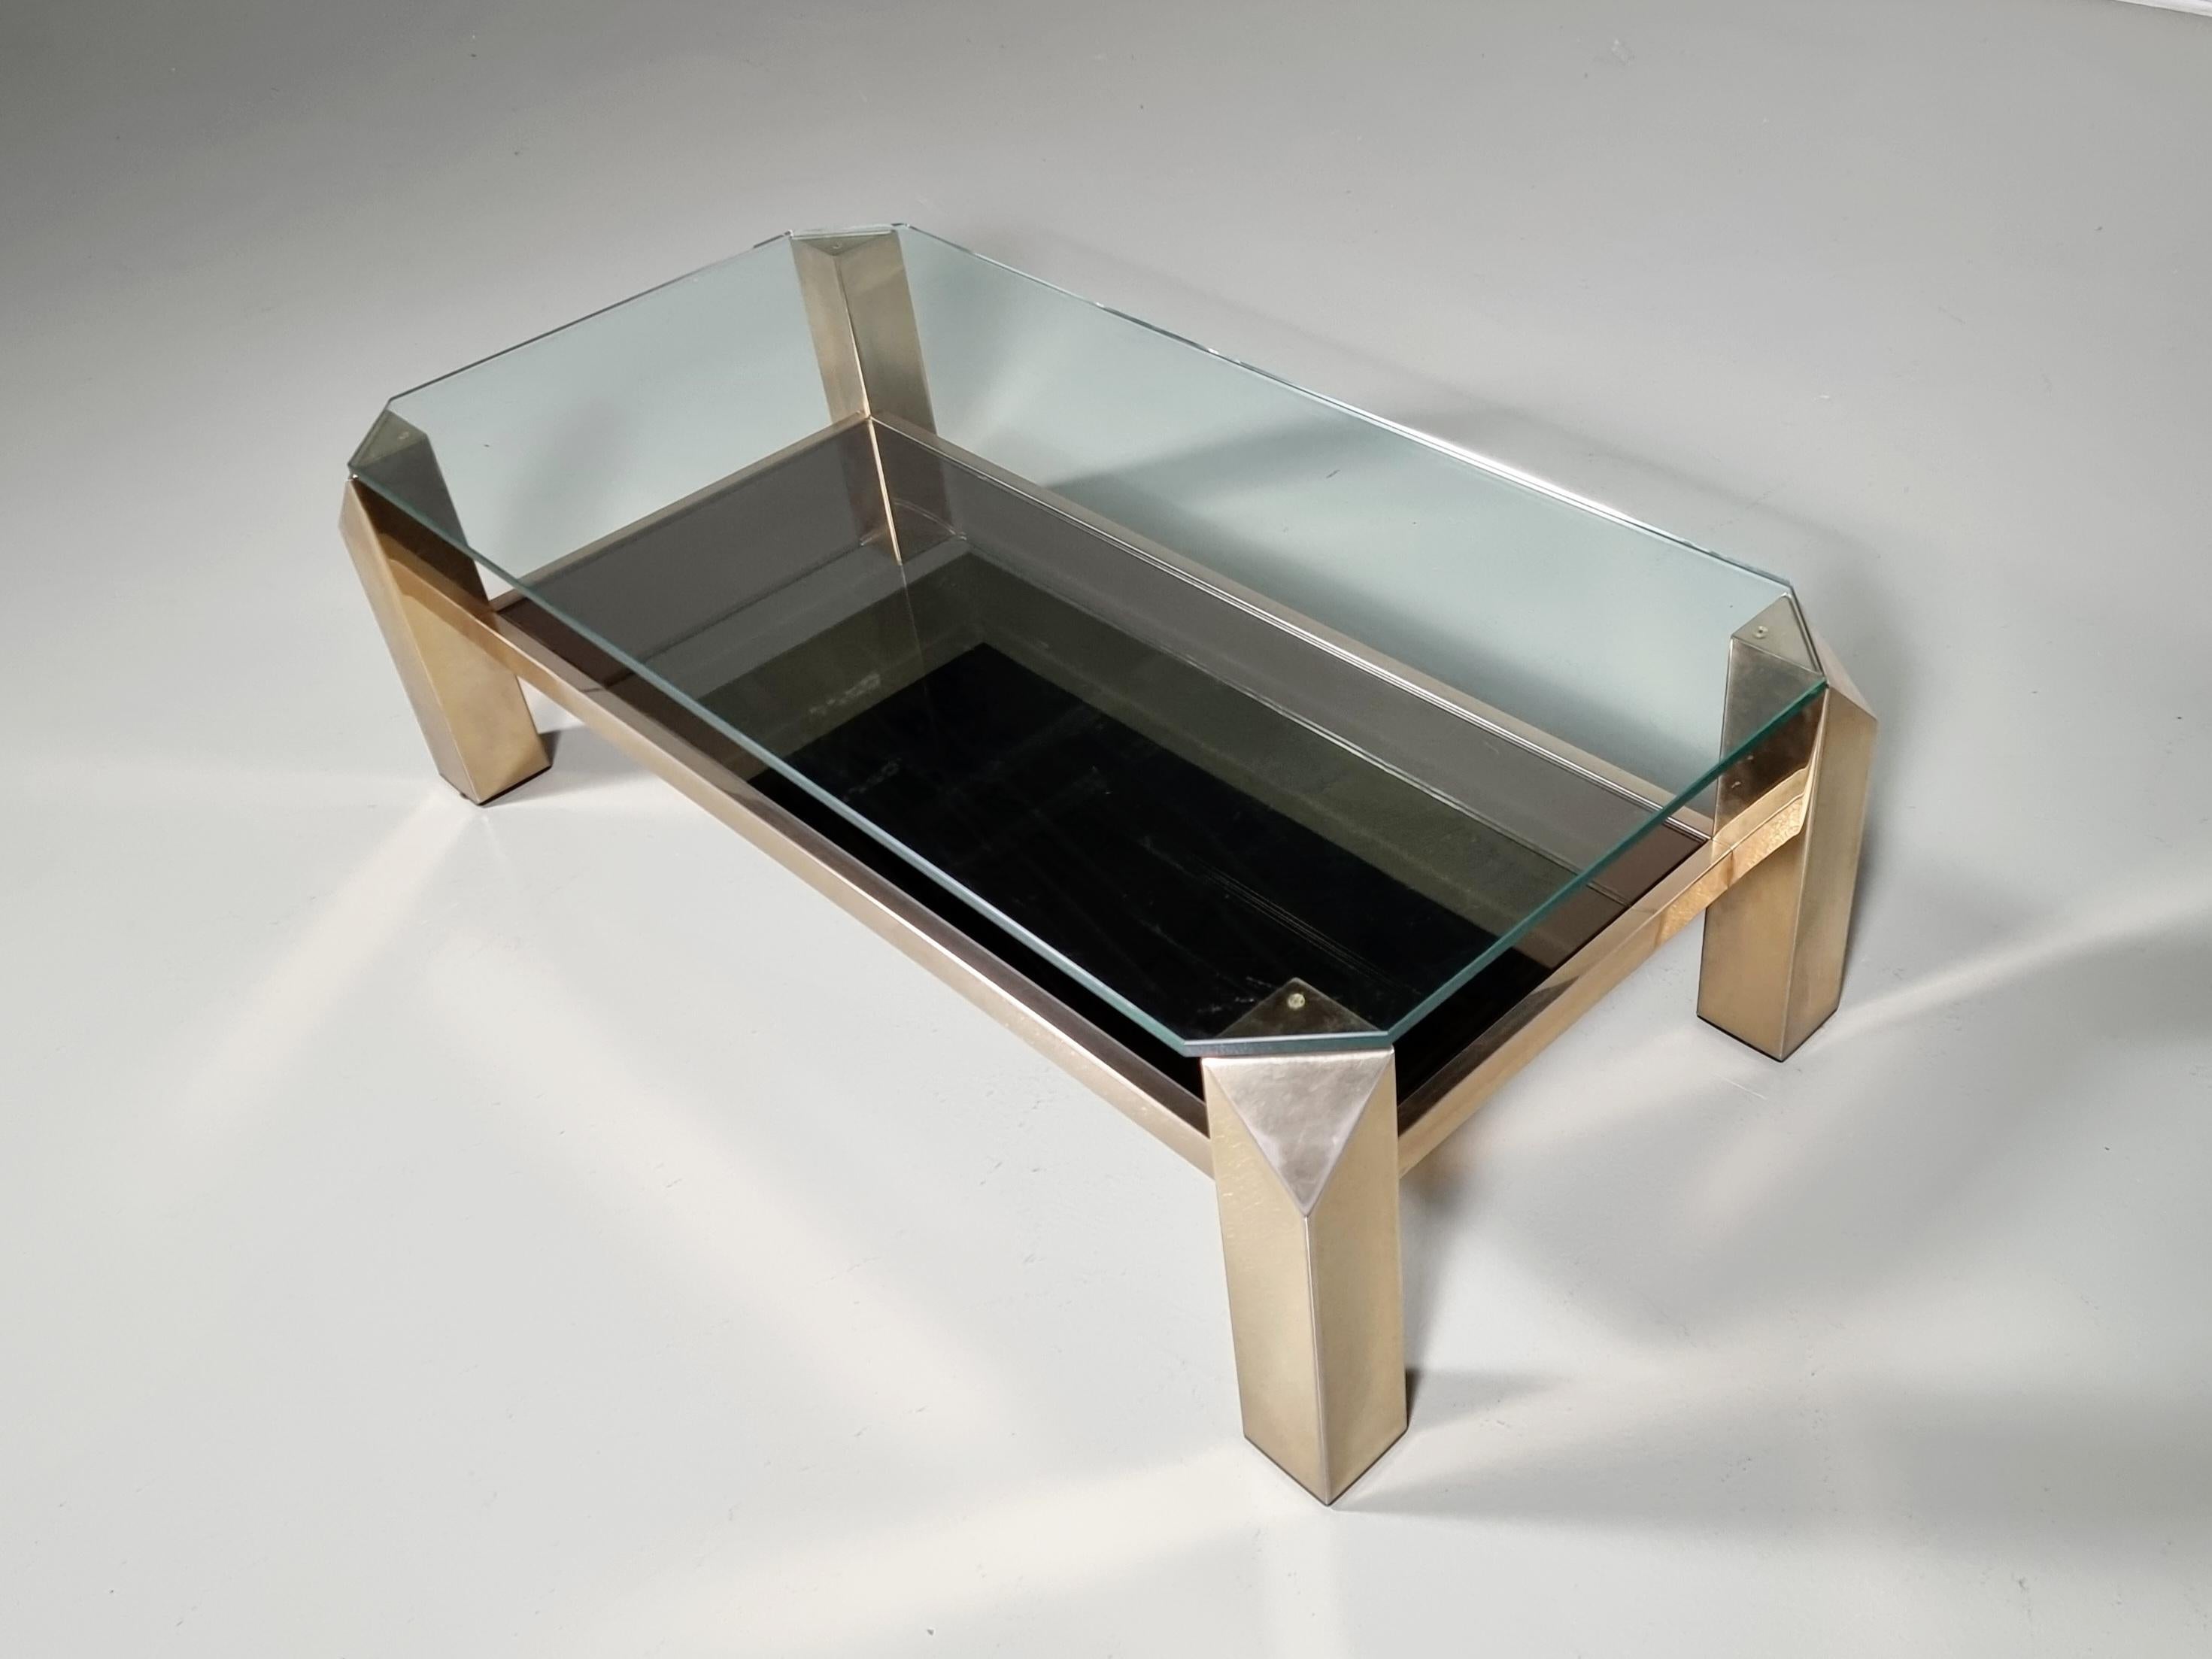 Belgo Chrom Coffee Table 23 Karat Gold Plated, 1970s For Sale 1